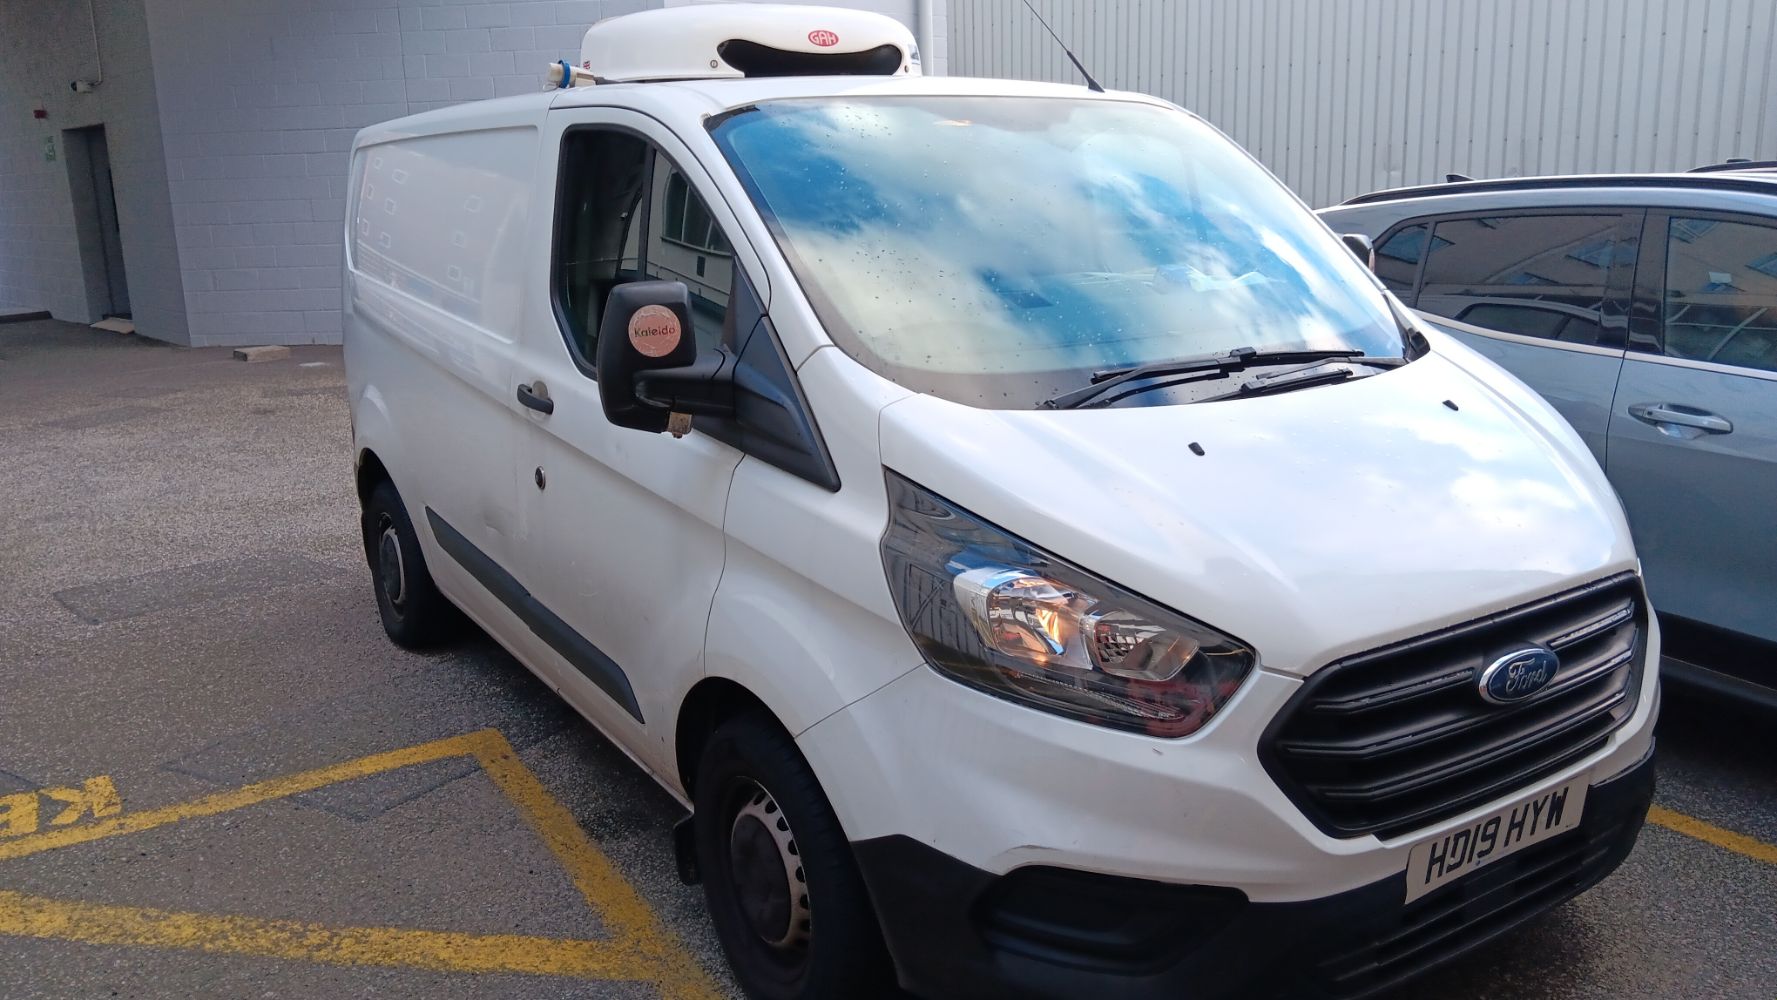 Quality Commercial Catering Equipment, Ford Transit Refrigerated Van (2019), Walk-in Cold Room etc.